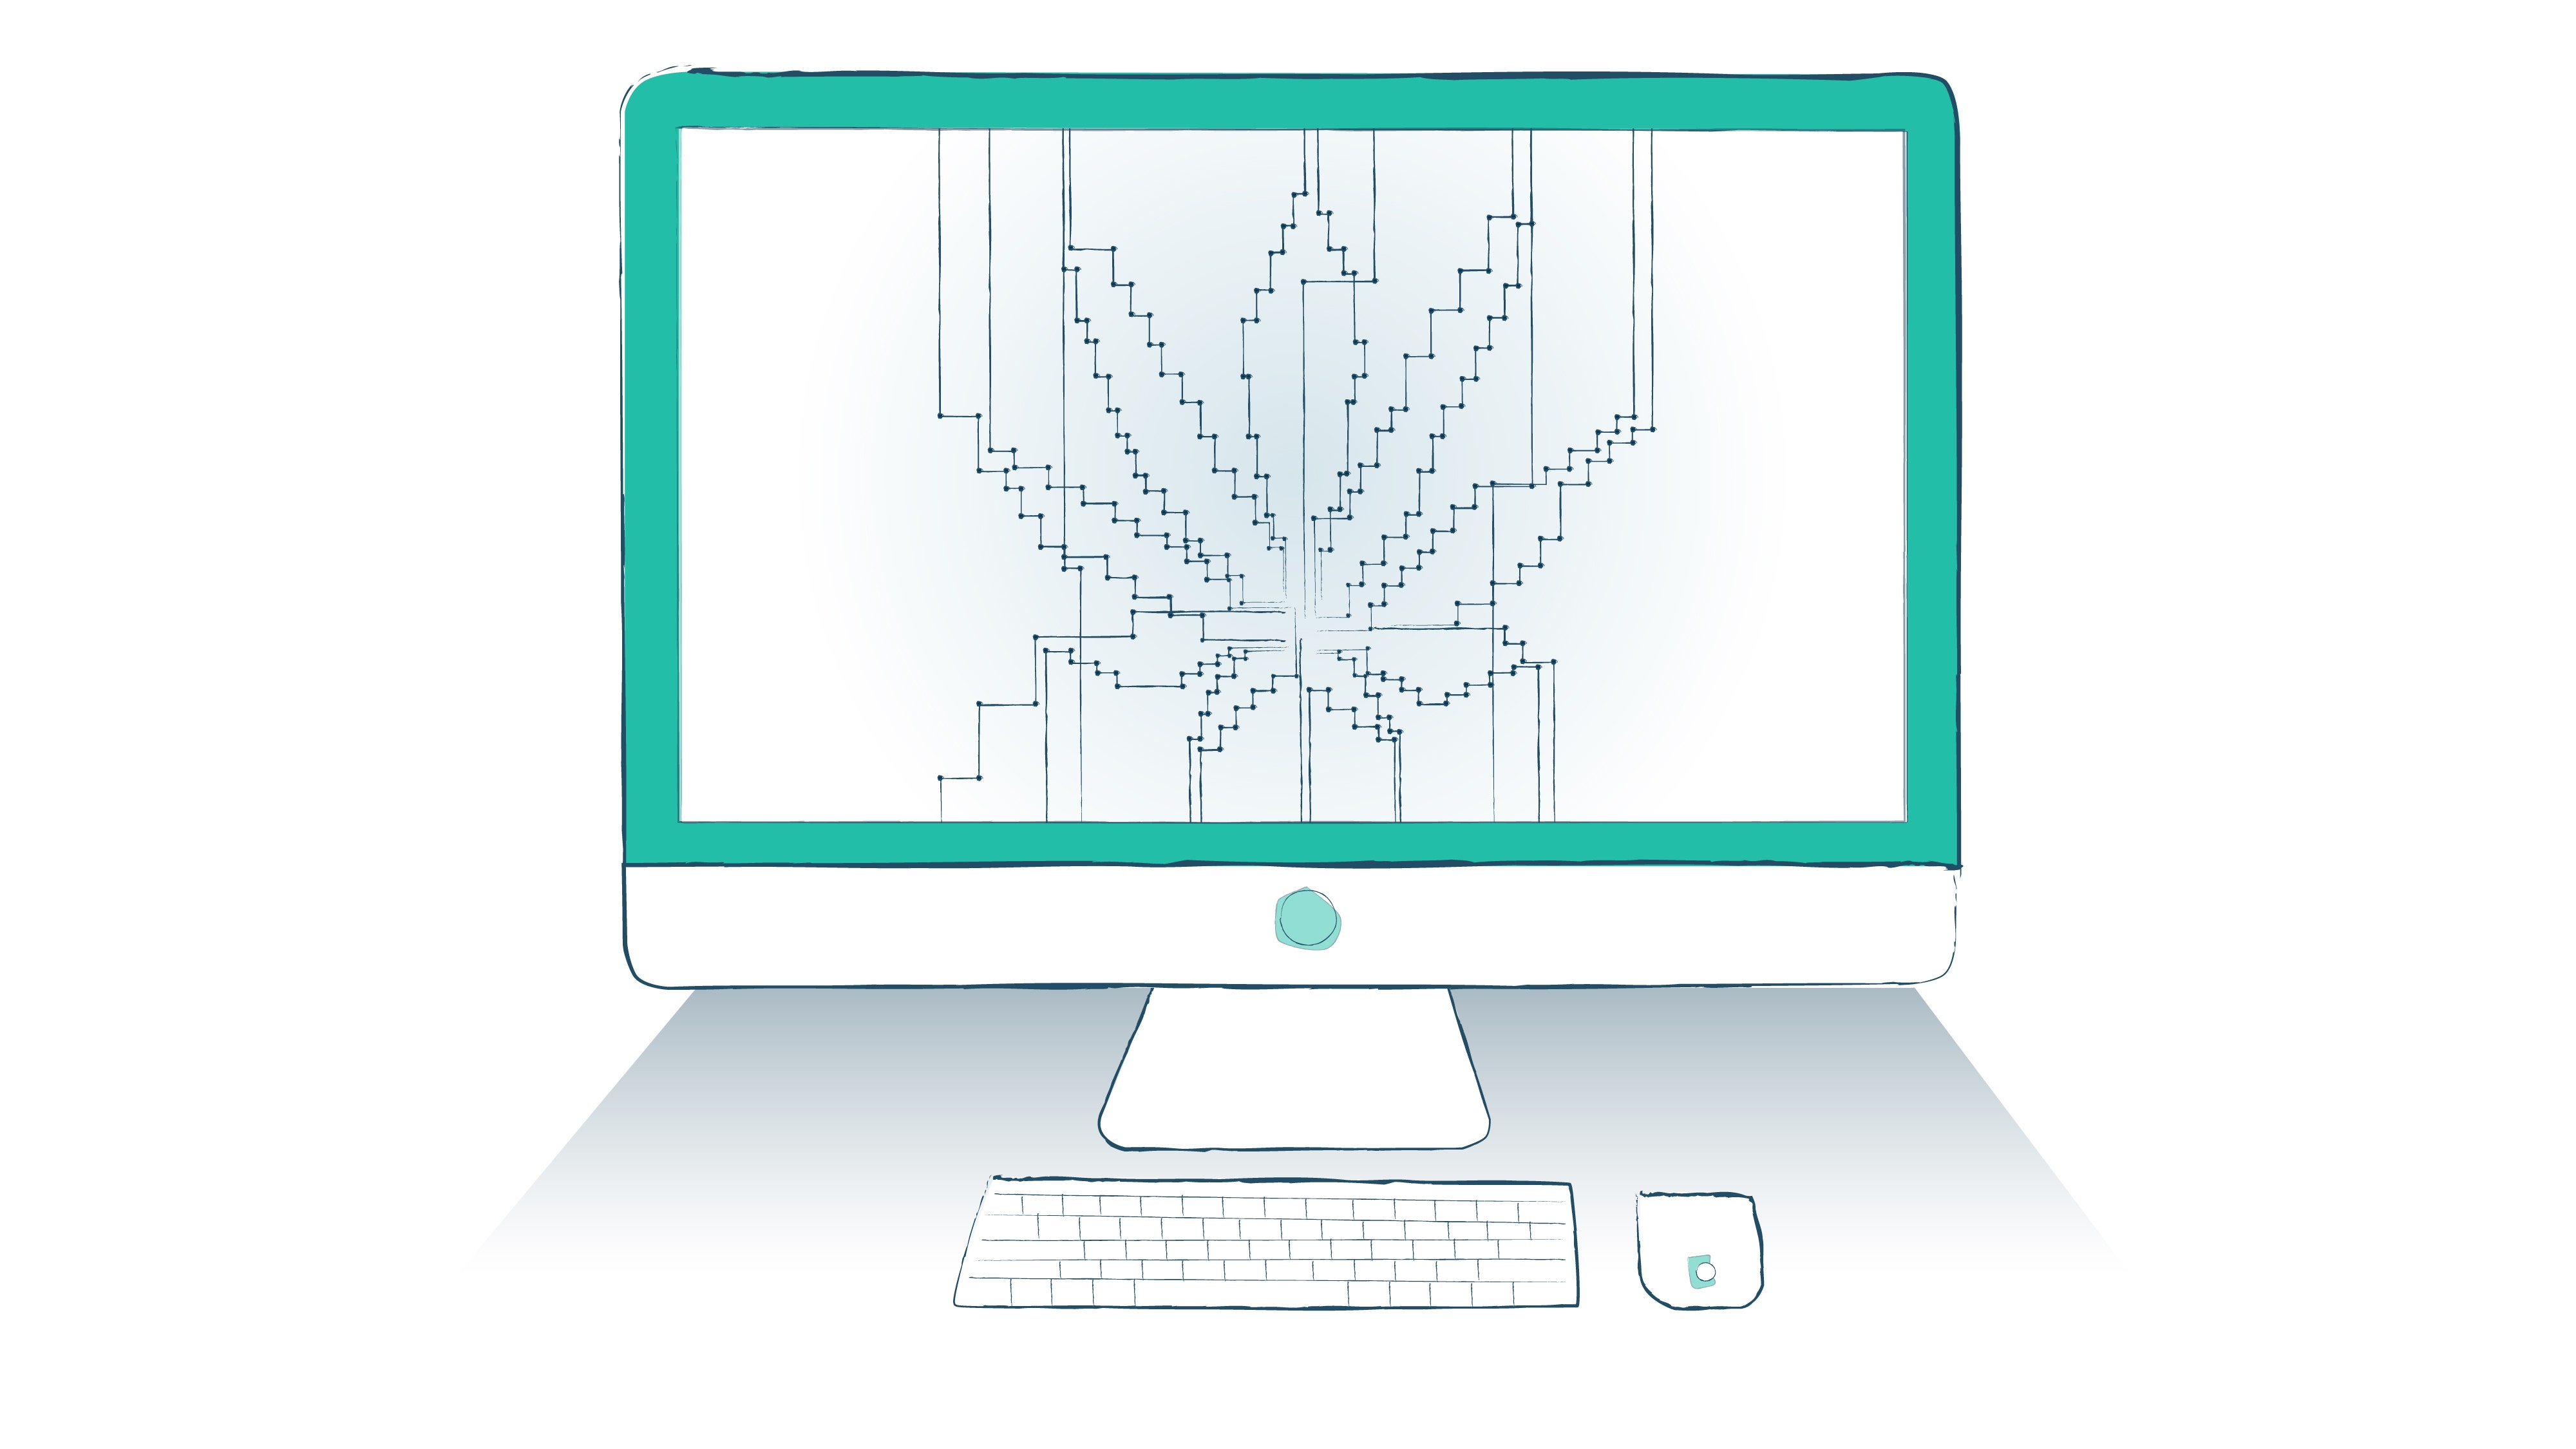 Amazon Includes Cannabis Company In AWS Data Marketplace For First Time